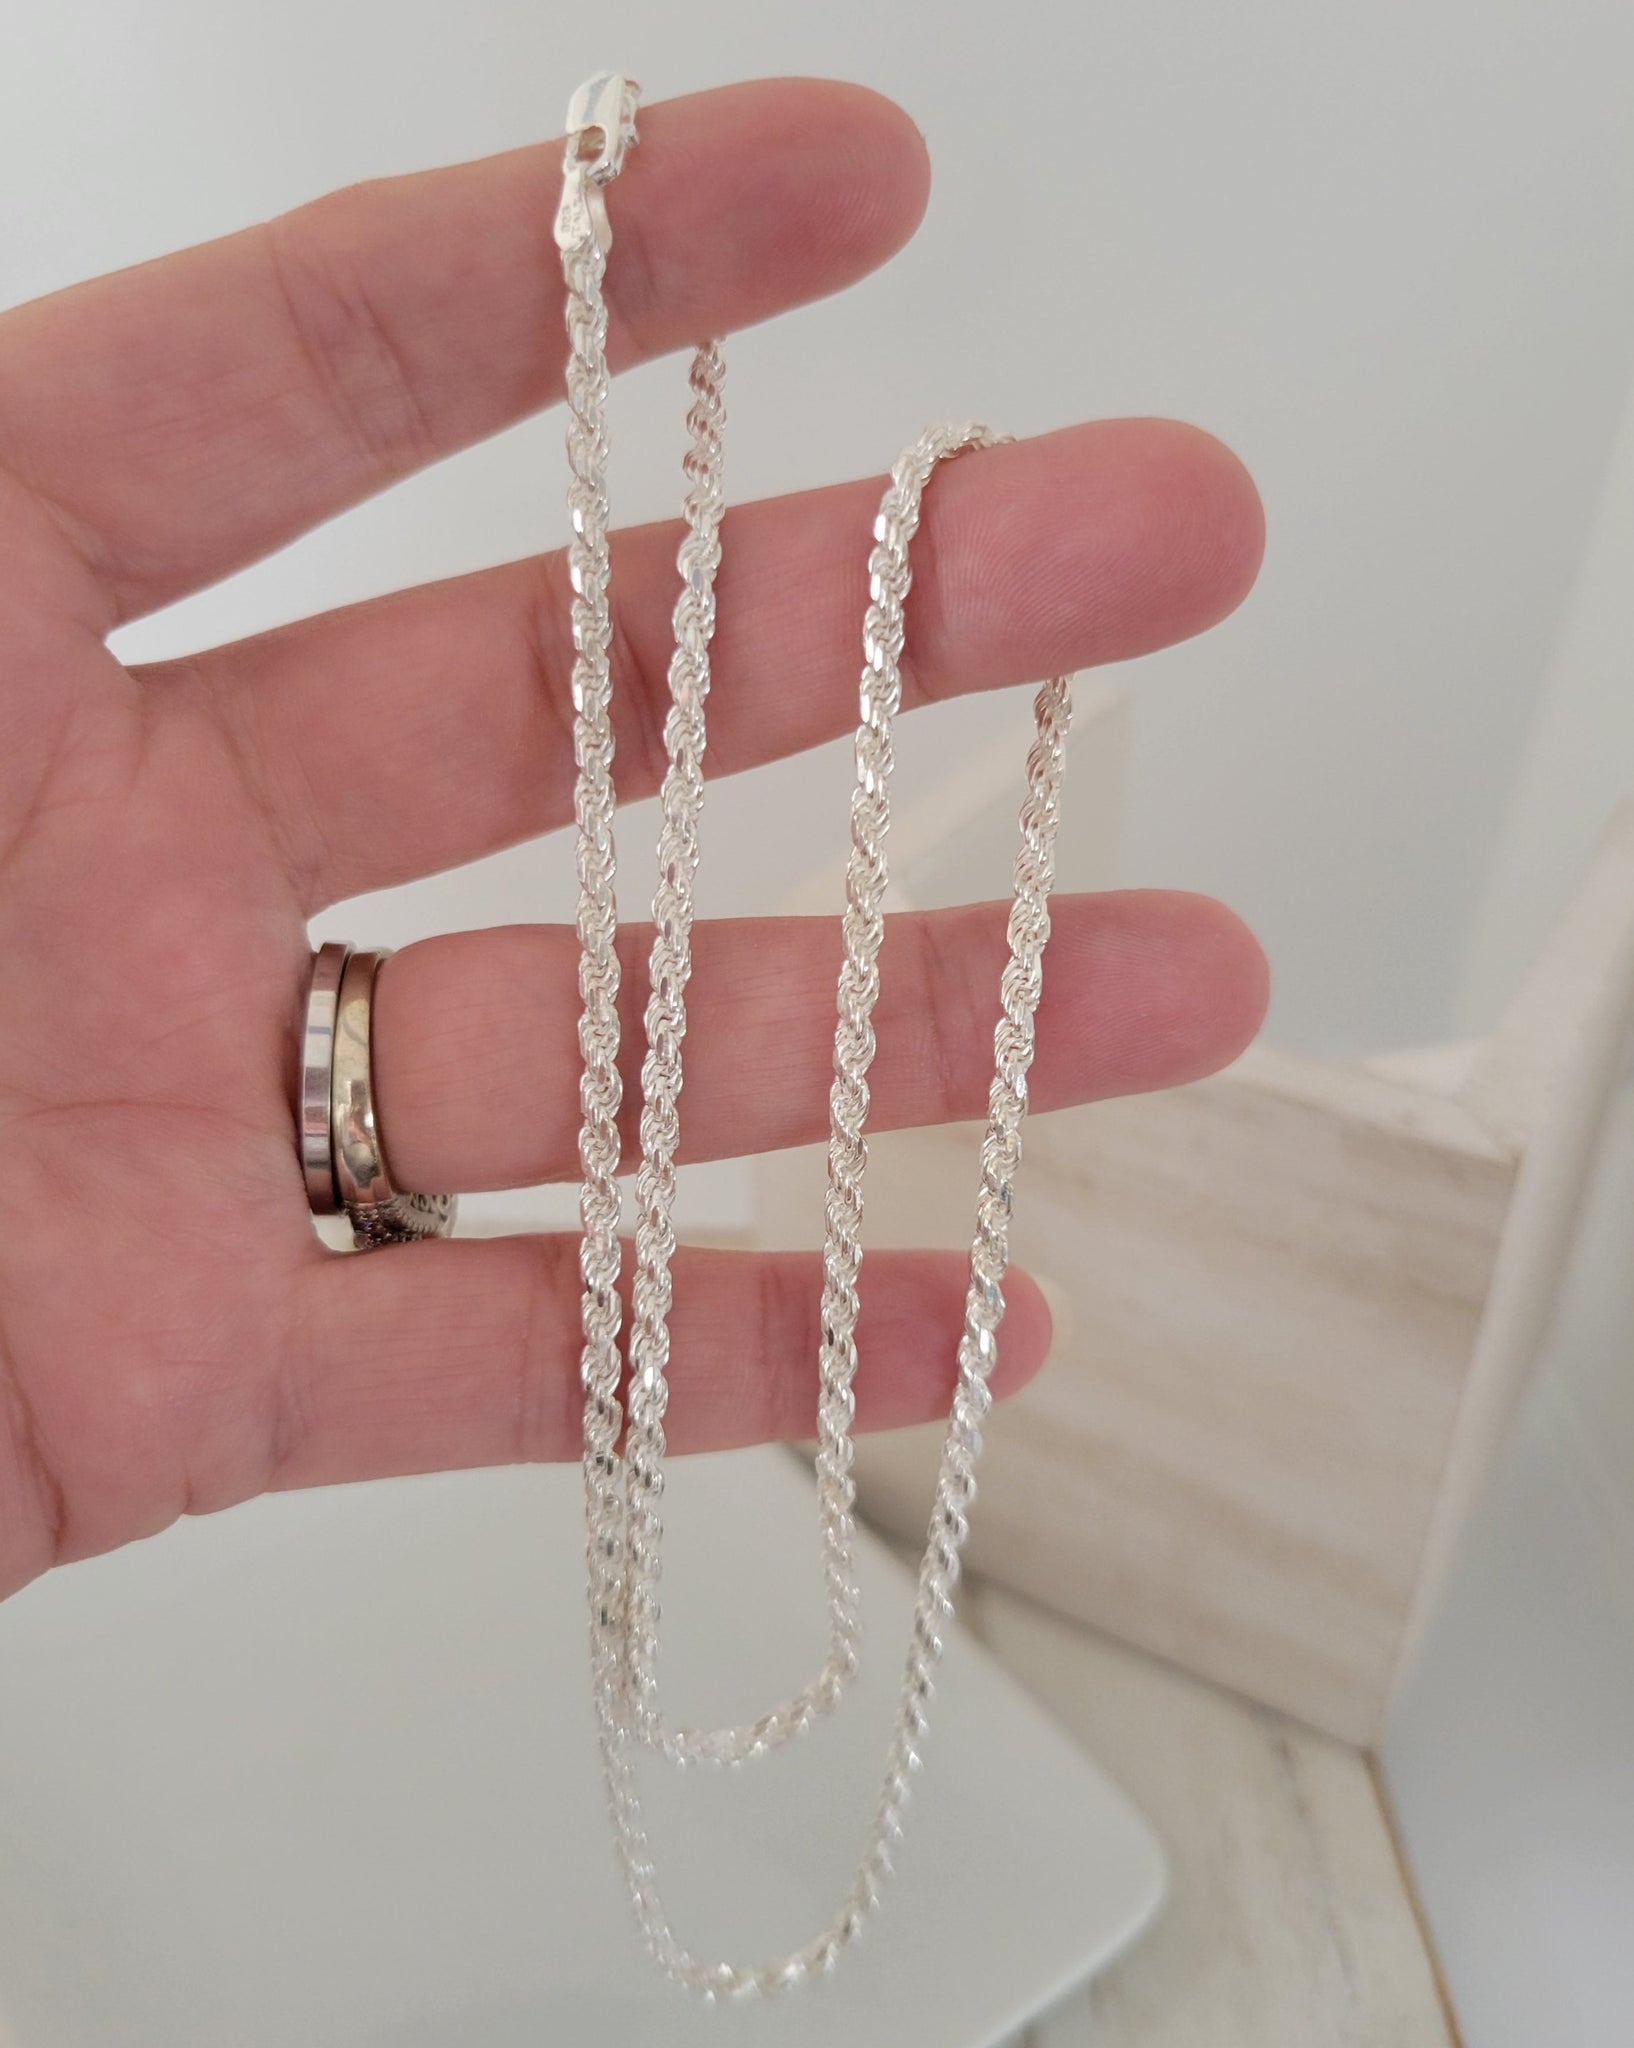 Men's Sterling Silver Thick Rope Chain Necklace